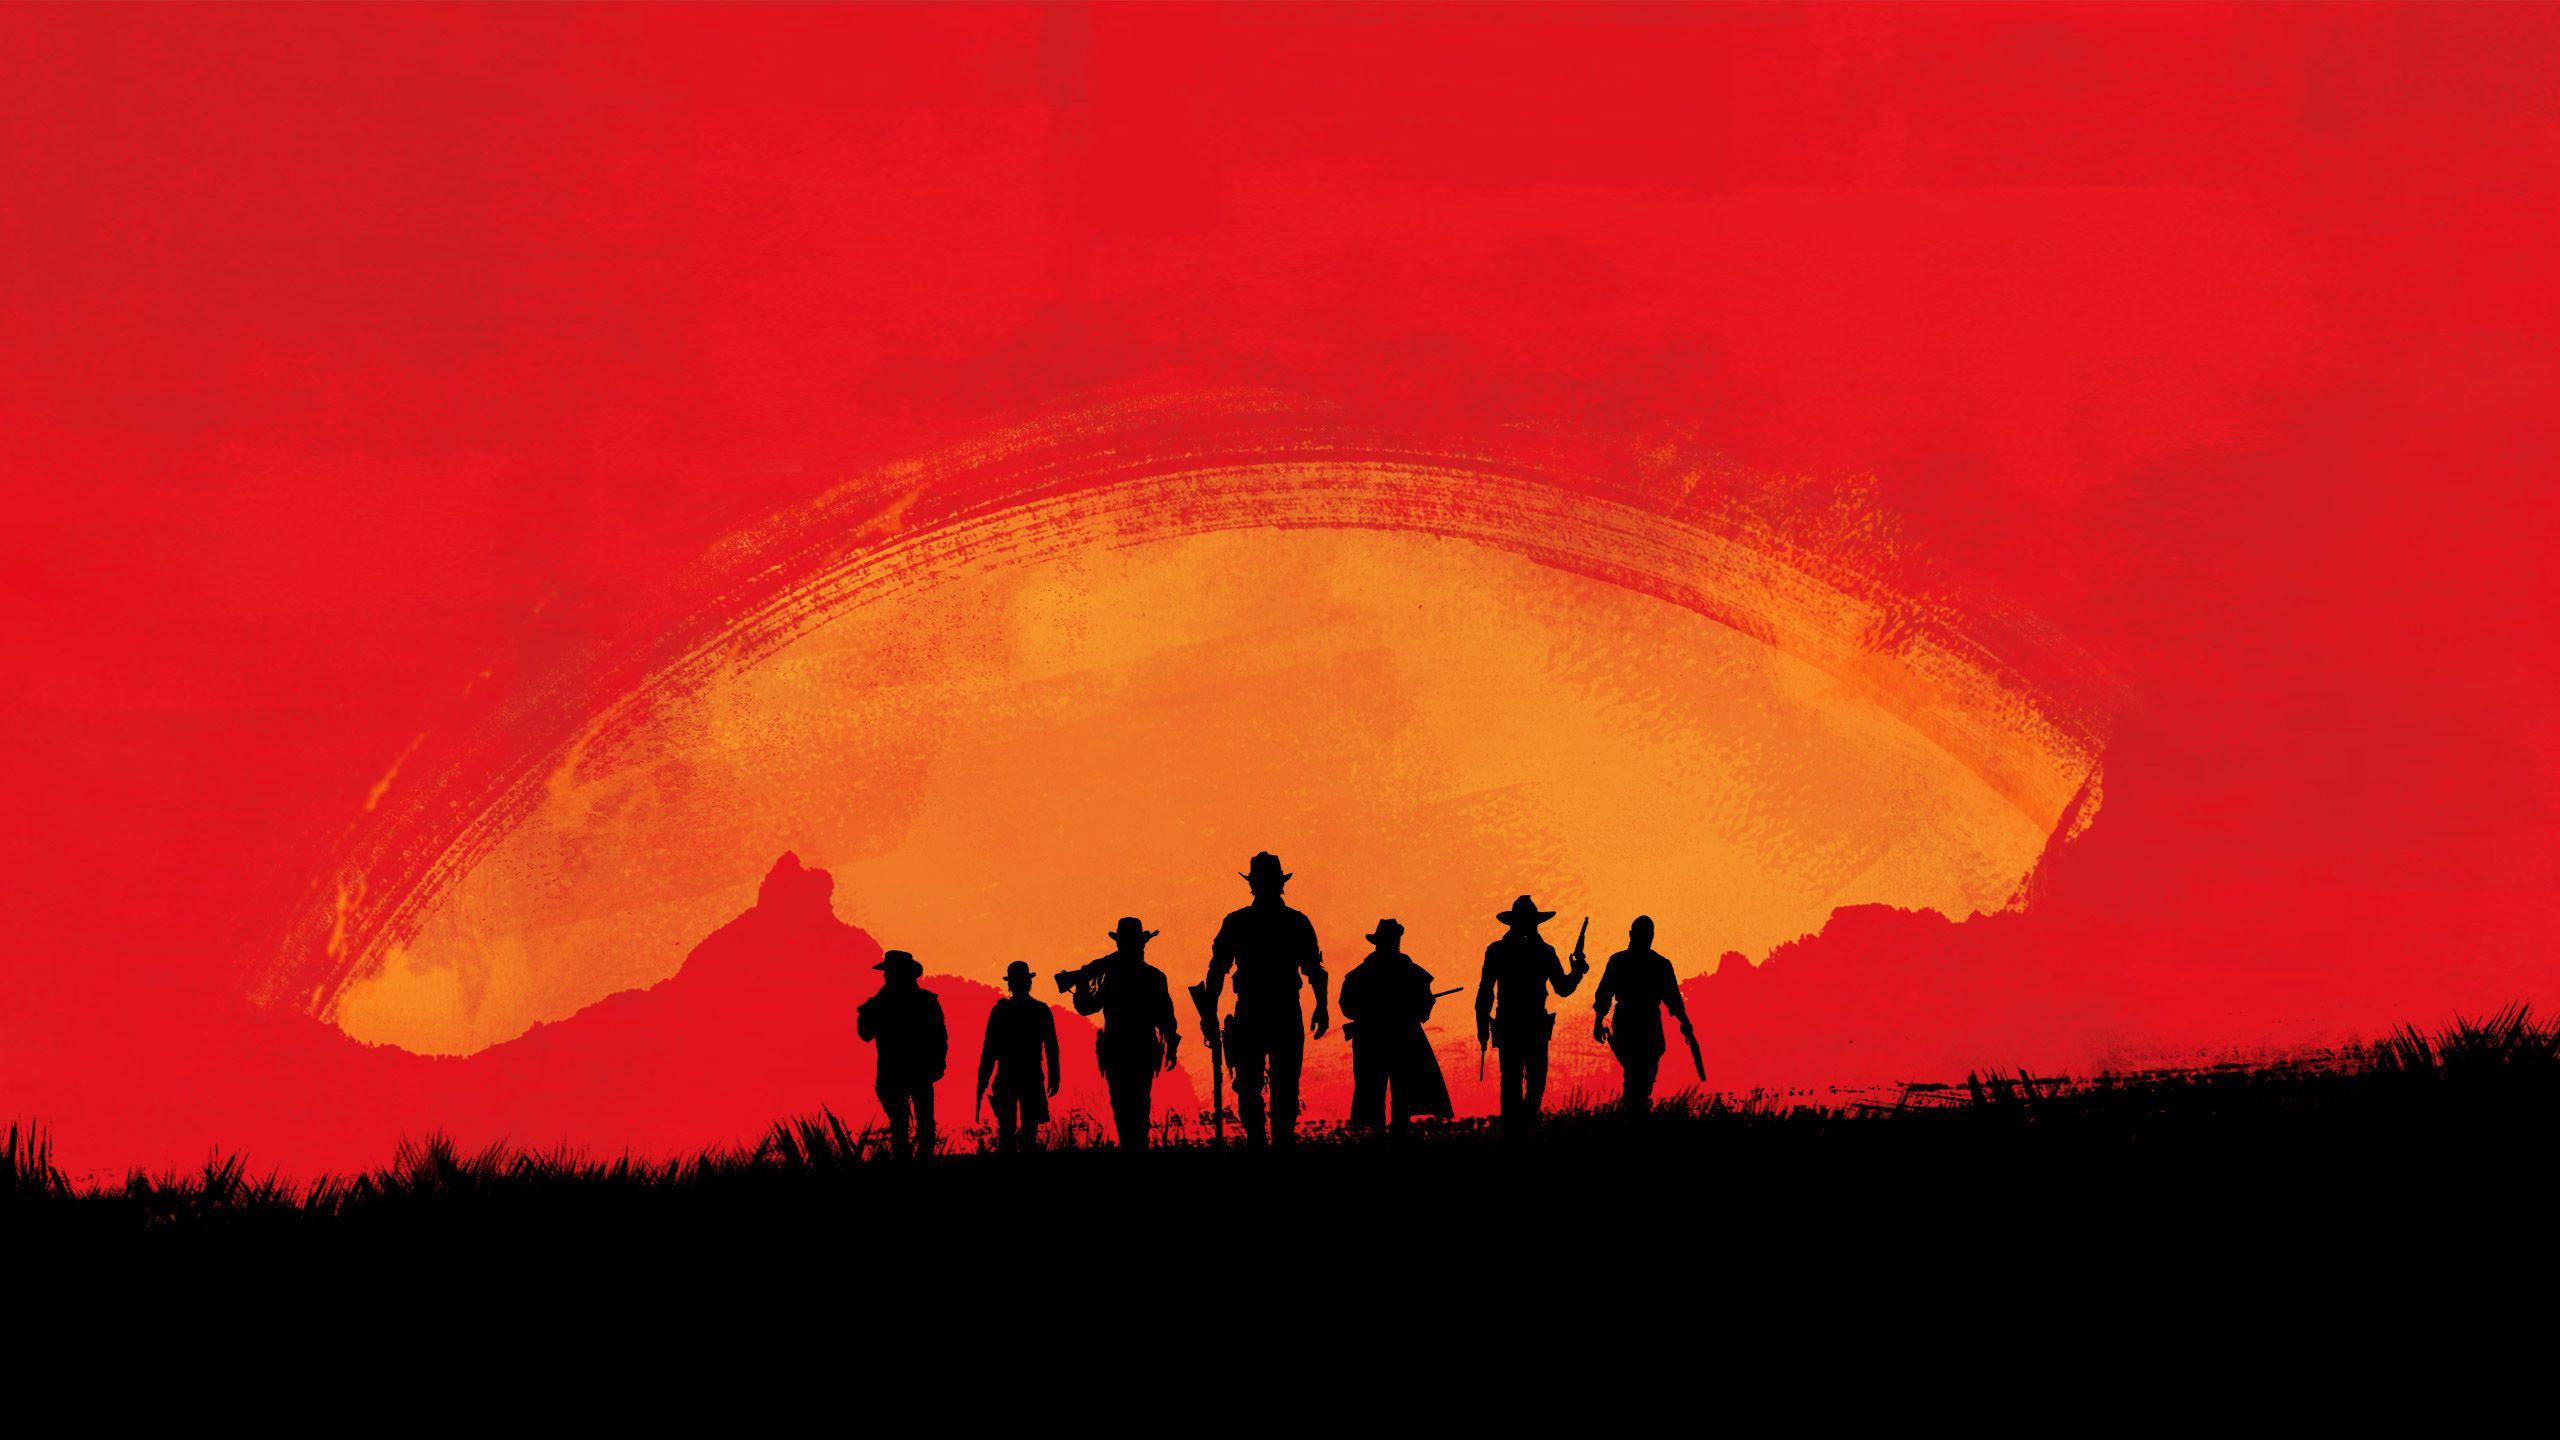 red dead redemption pc download free